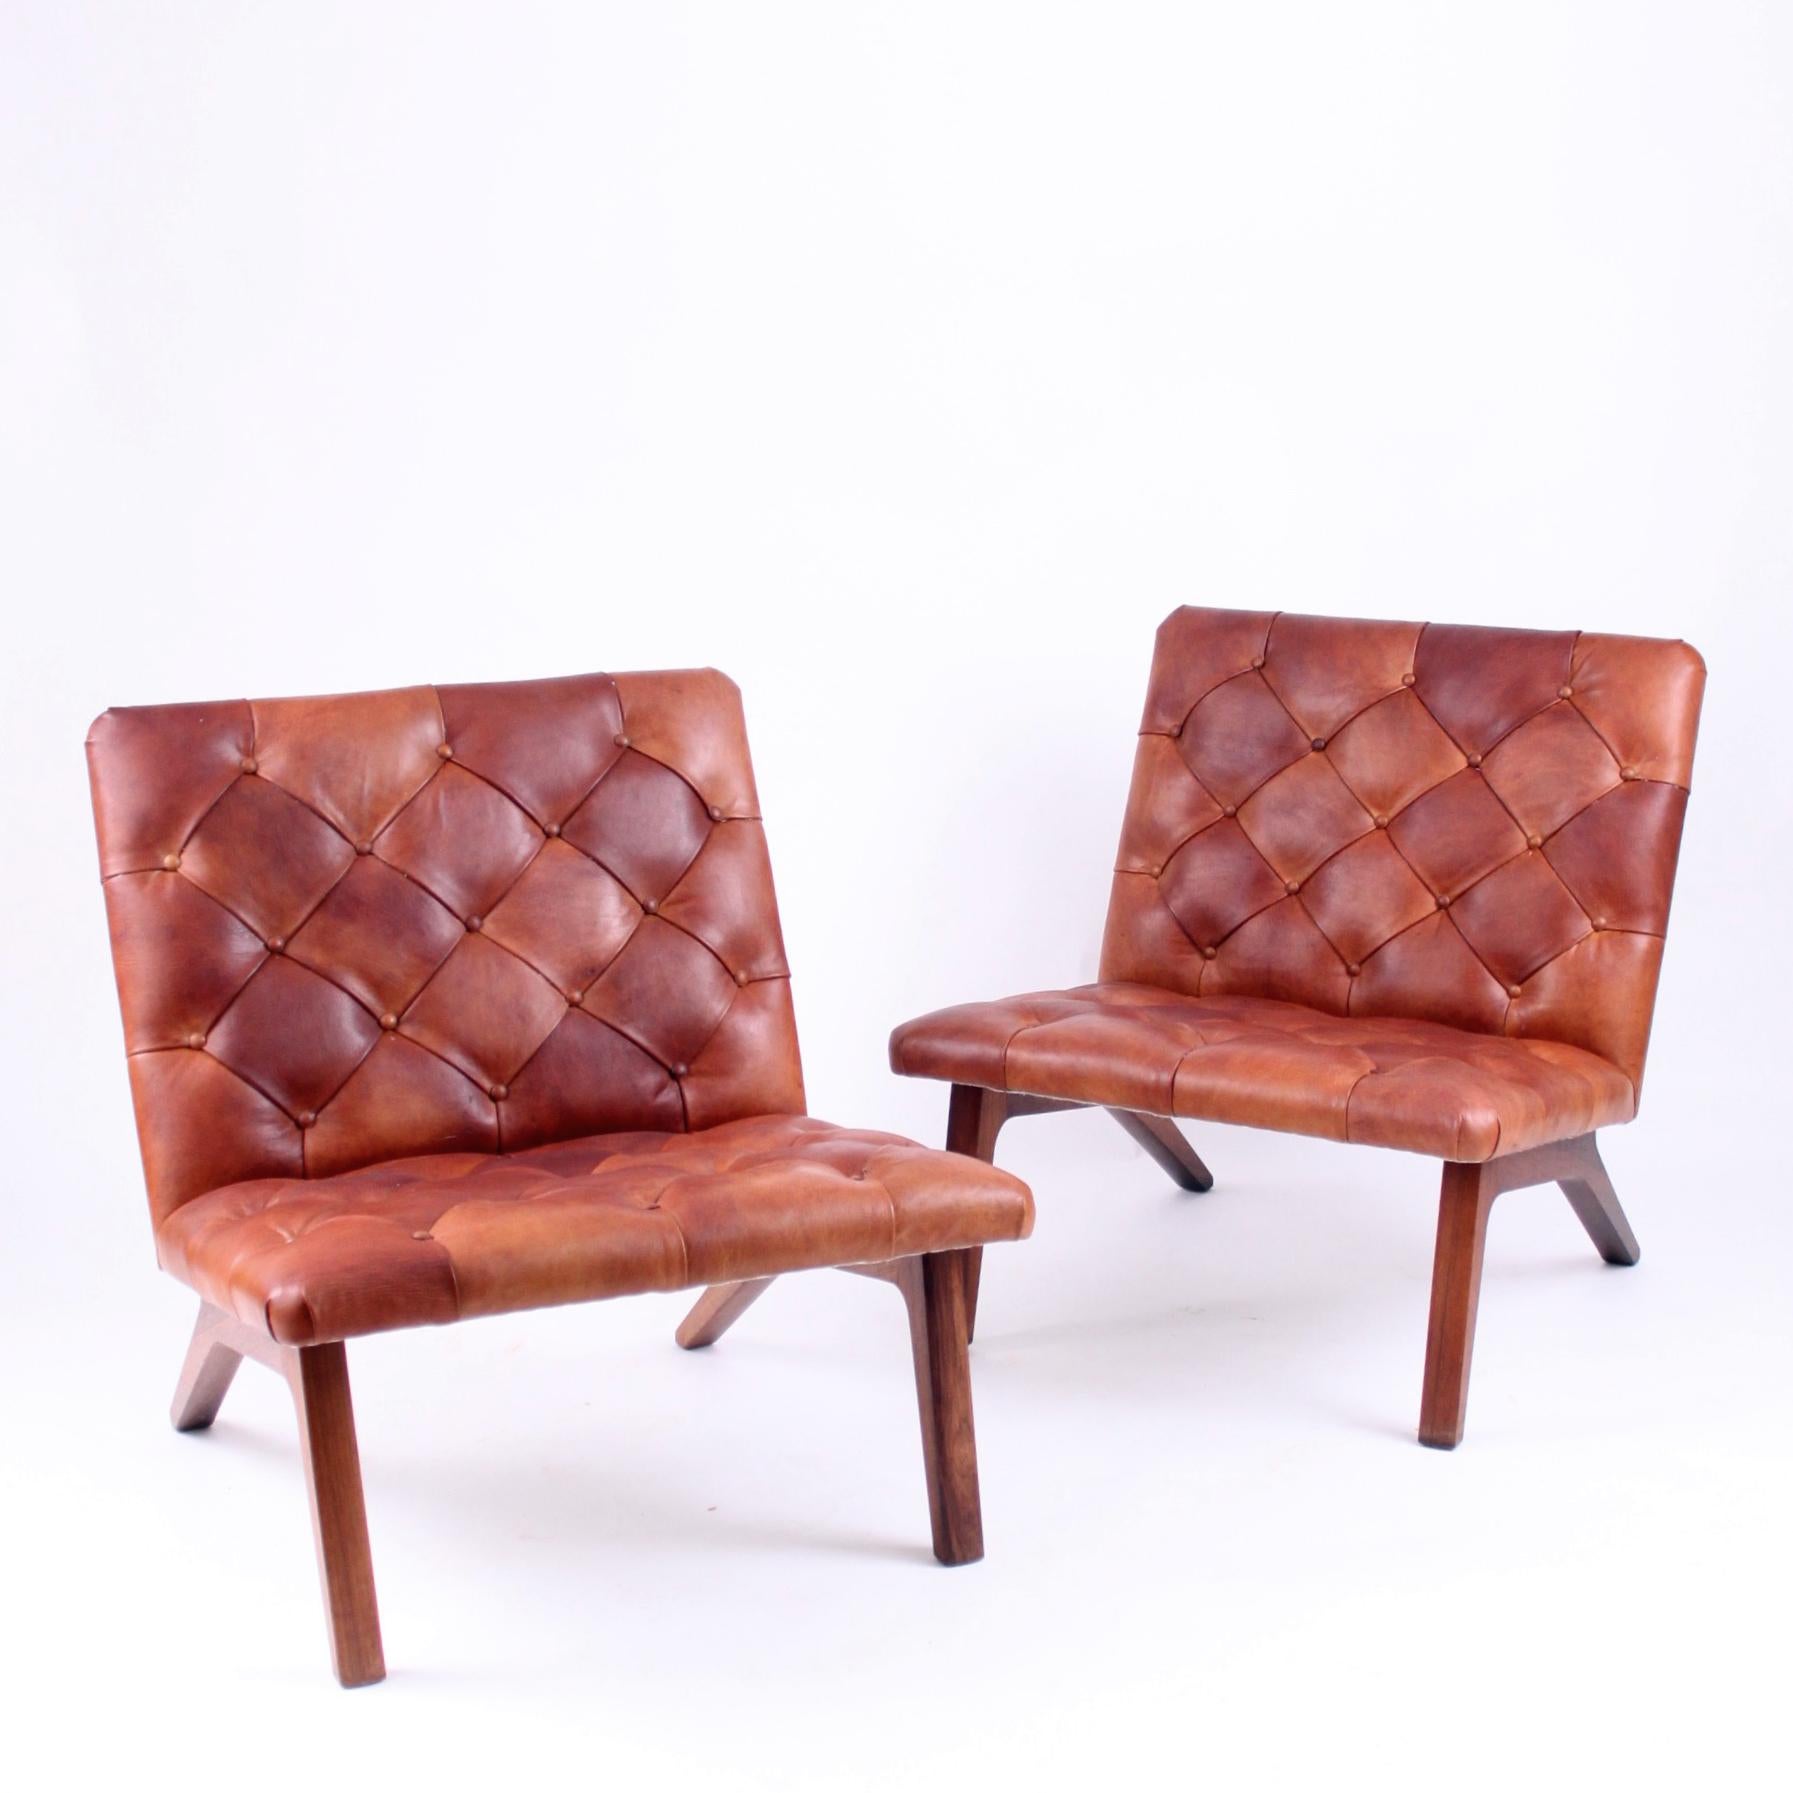 Mid-Century Modern Pair of Lounge Chairs, Helge Vestergaard Jensen, Rosewood and Niger Leather 1966